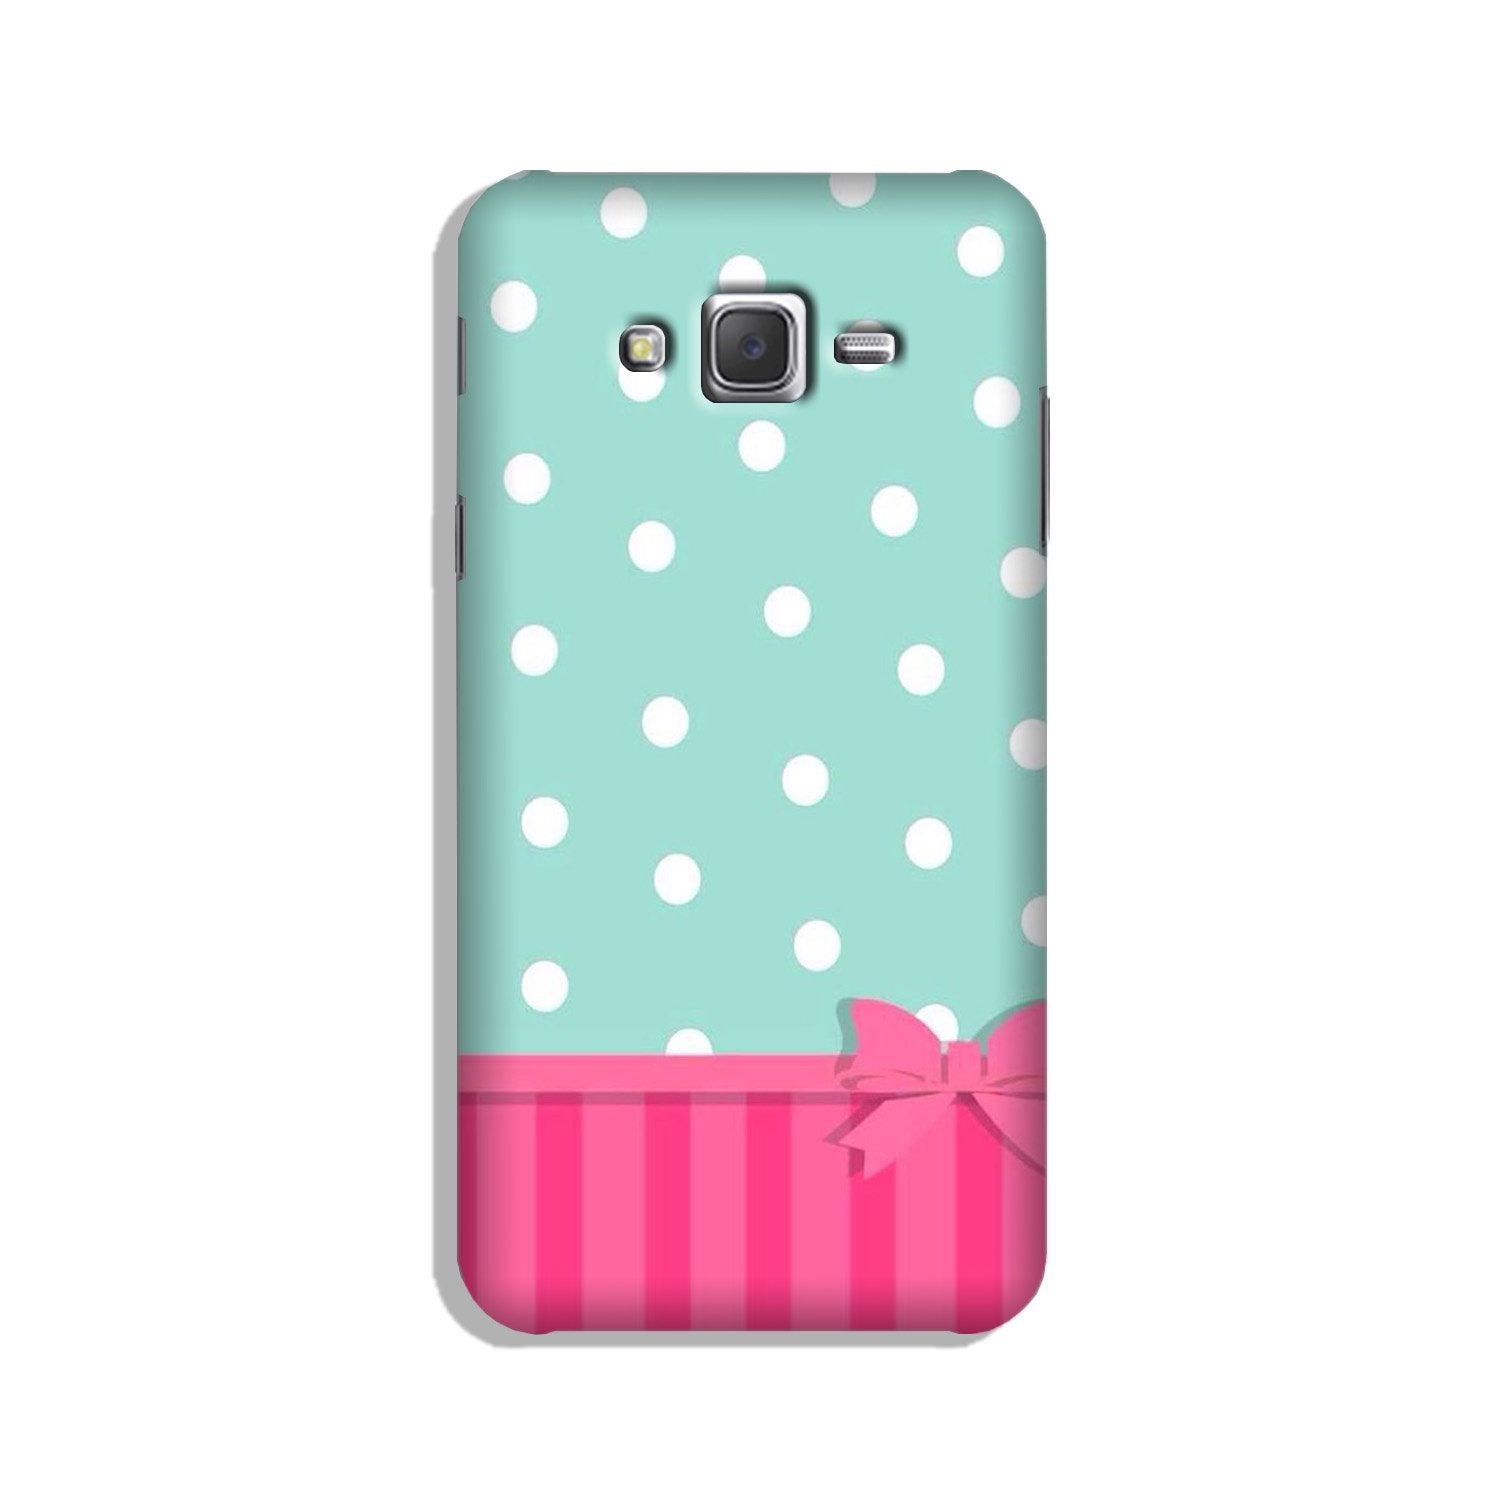 Gift Wrap Case for Galaxy J3 (2015)